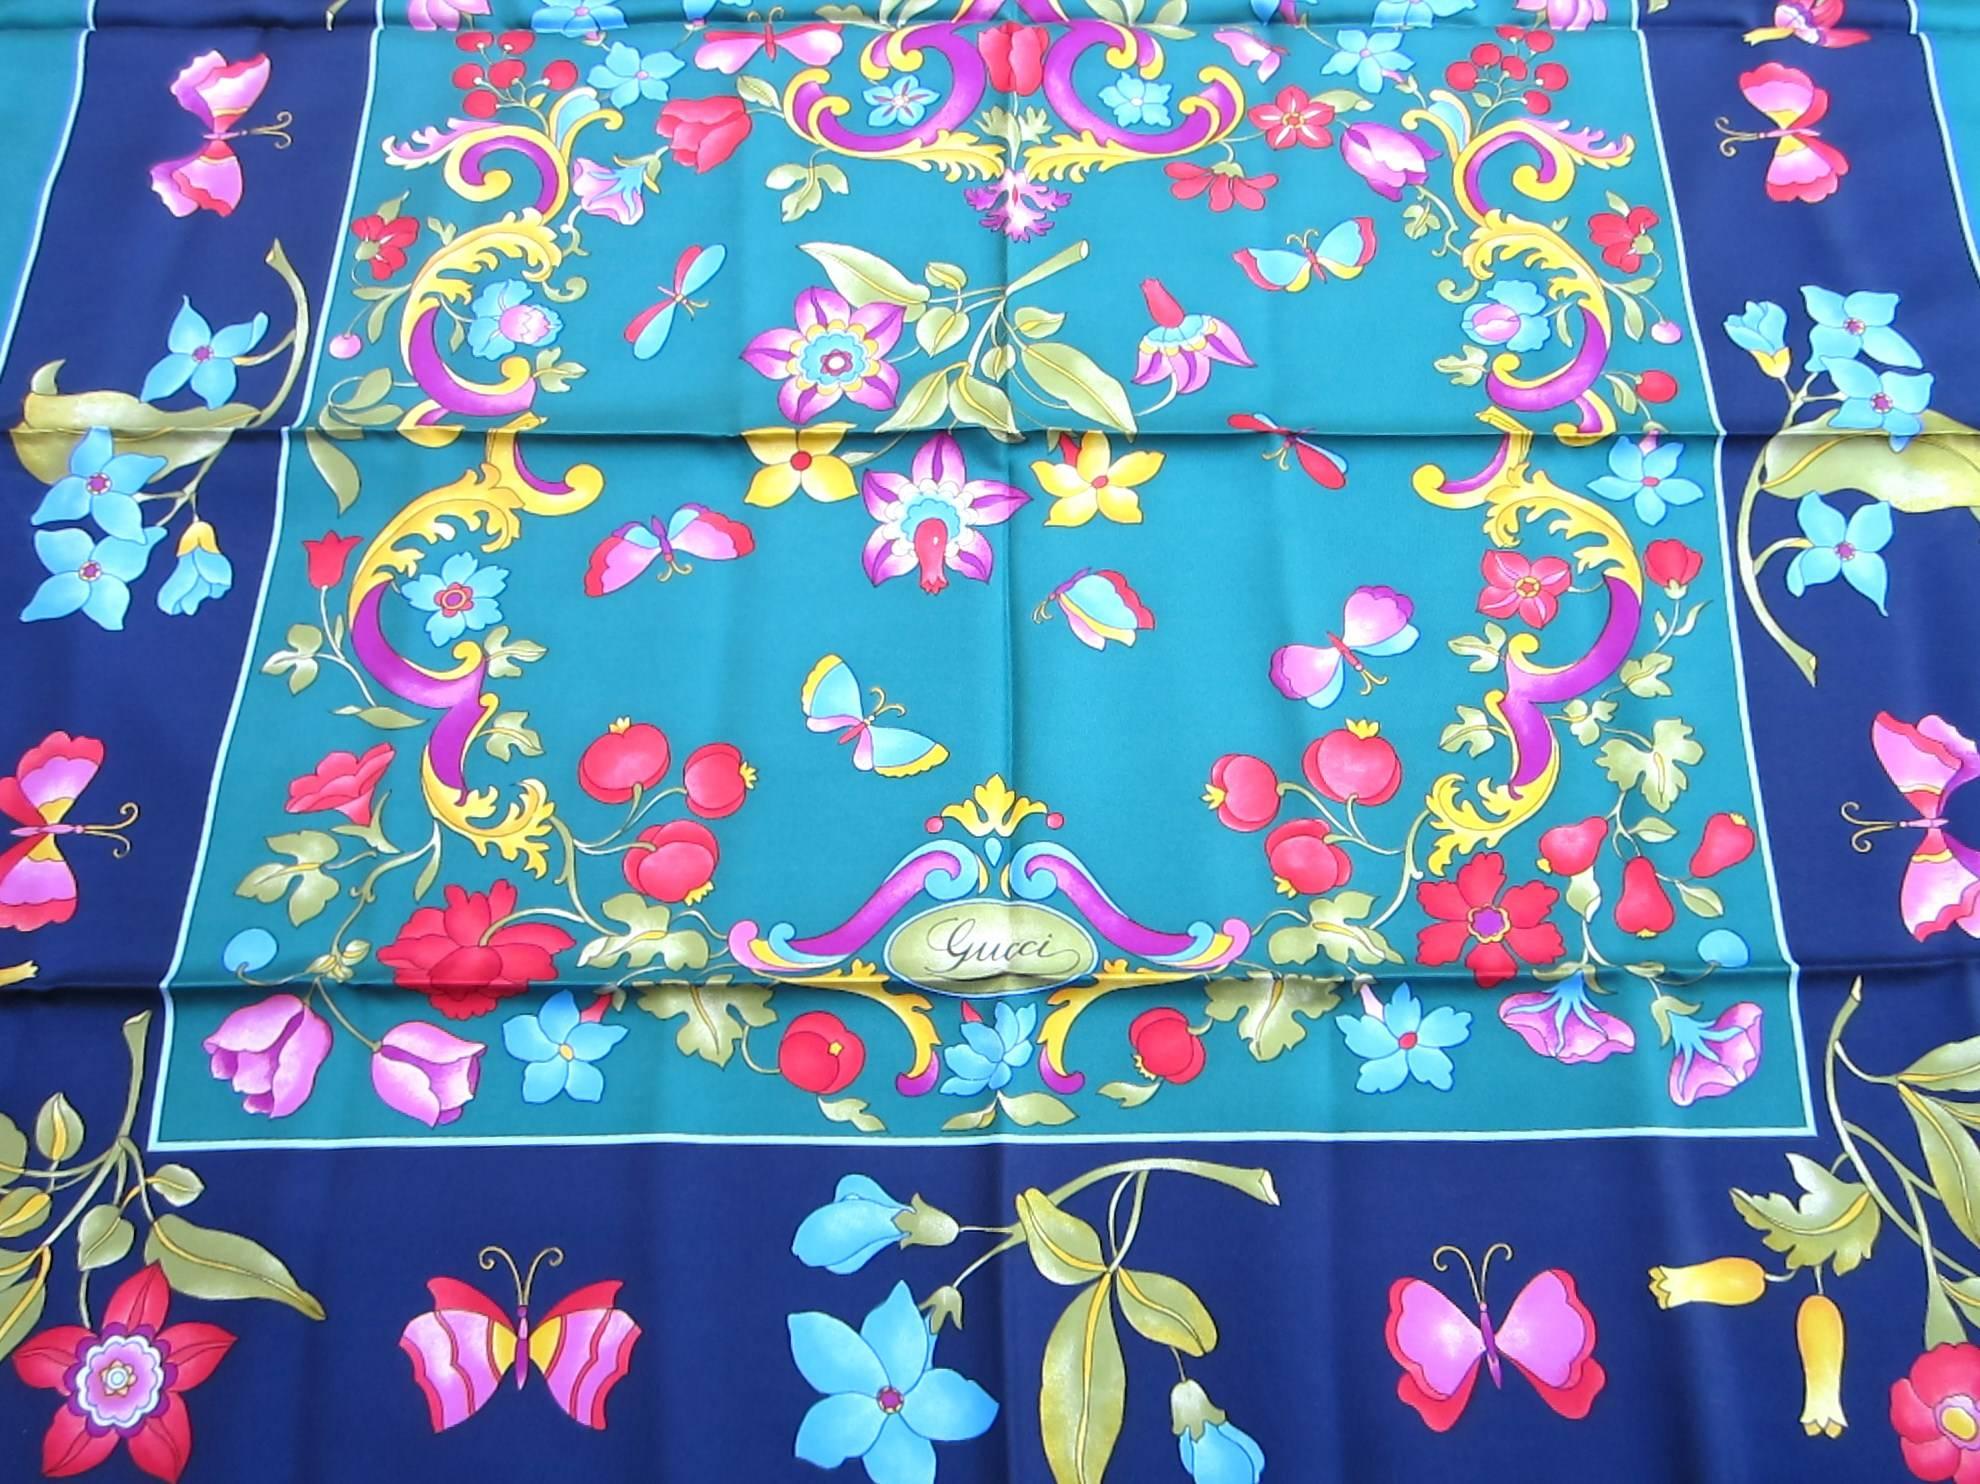 Here is another lovely silk Gucci scarf which as with the rest of the Gucci's are New Old Stock- Out of a Westchester County NY Estate
Purchased and stored away since the late 80s early 90s. They were folded up after being purchased and never